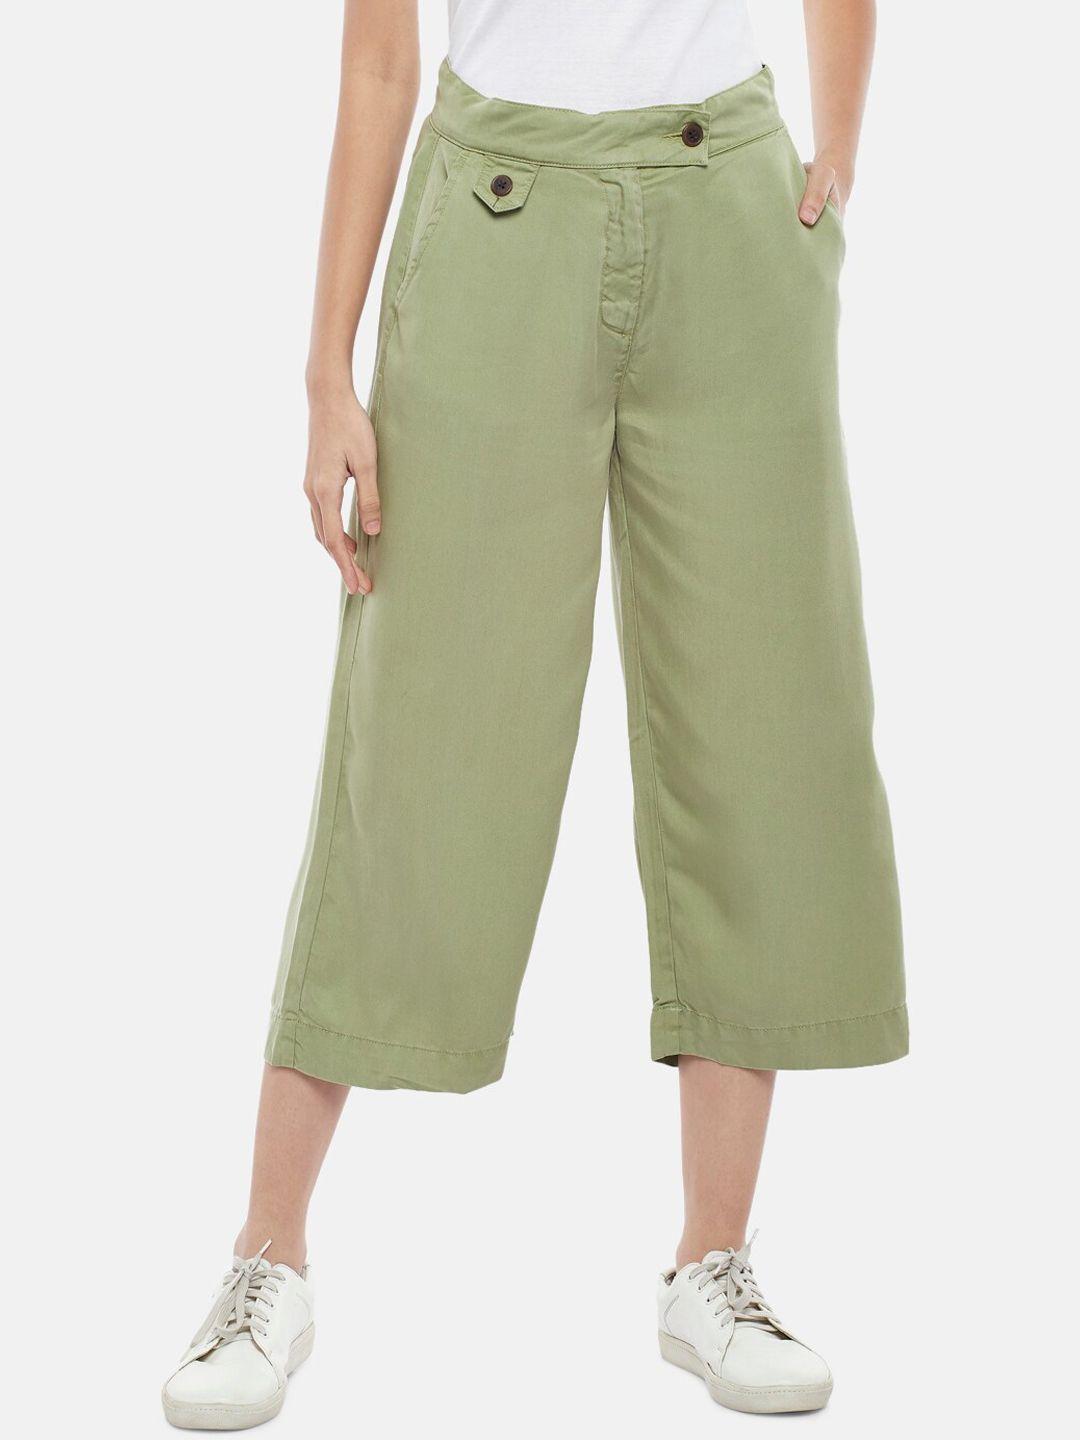 people women olive green high-rise culottes trousers